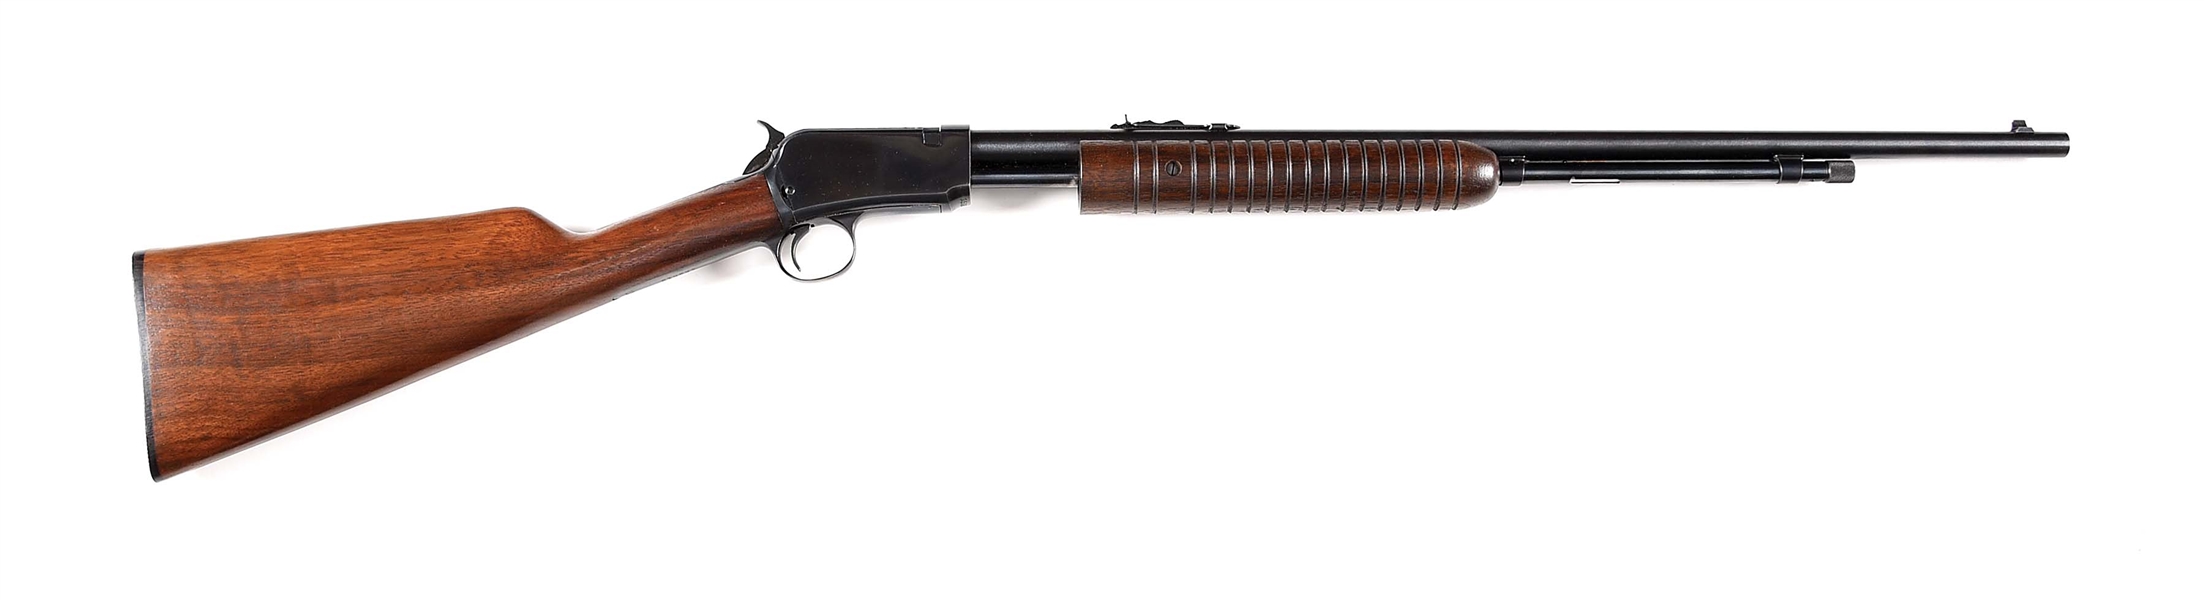 (C) WINCHESTER MODEL 62A SLIDE ACTION RIFLE (1946).